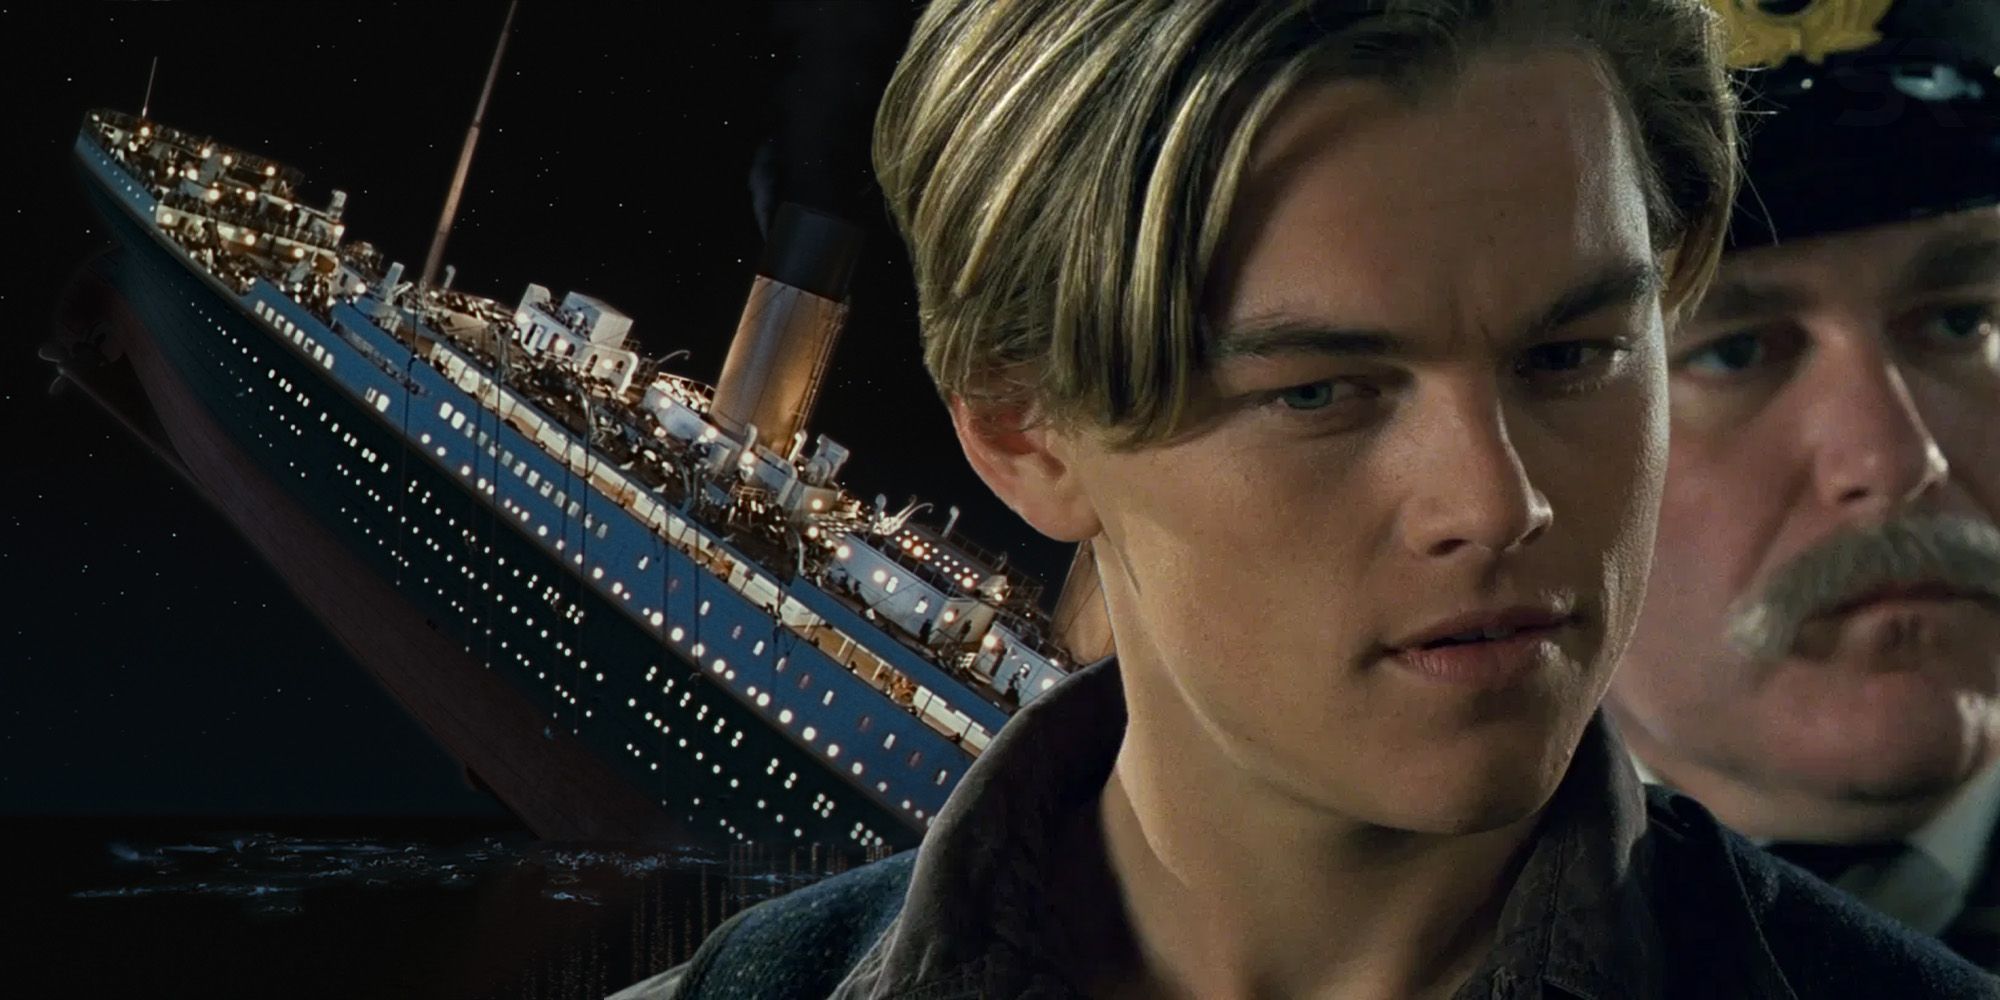 If you guys remember that titanic pose, will Kate Winslet die if she  accidentally falls off the ship in the movie? - Quora